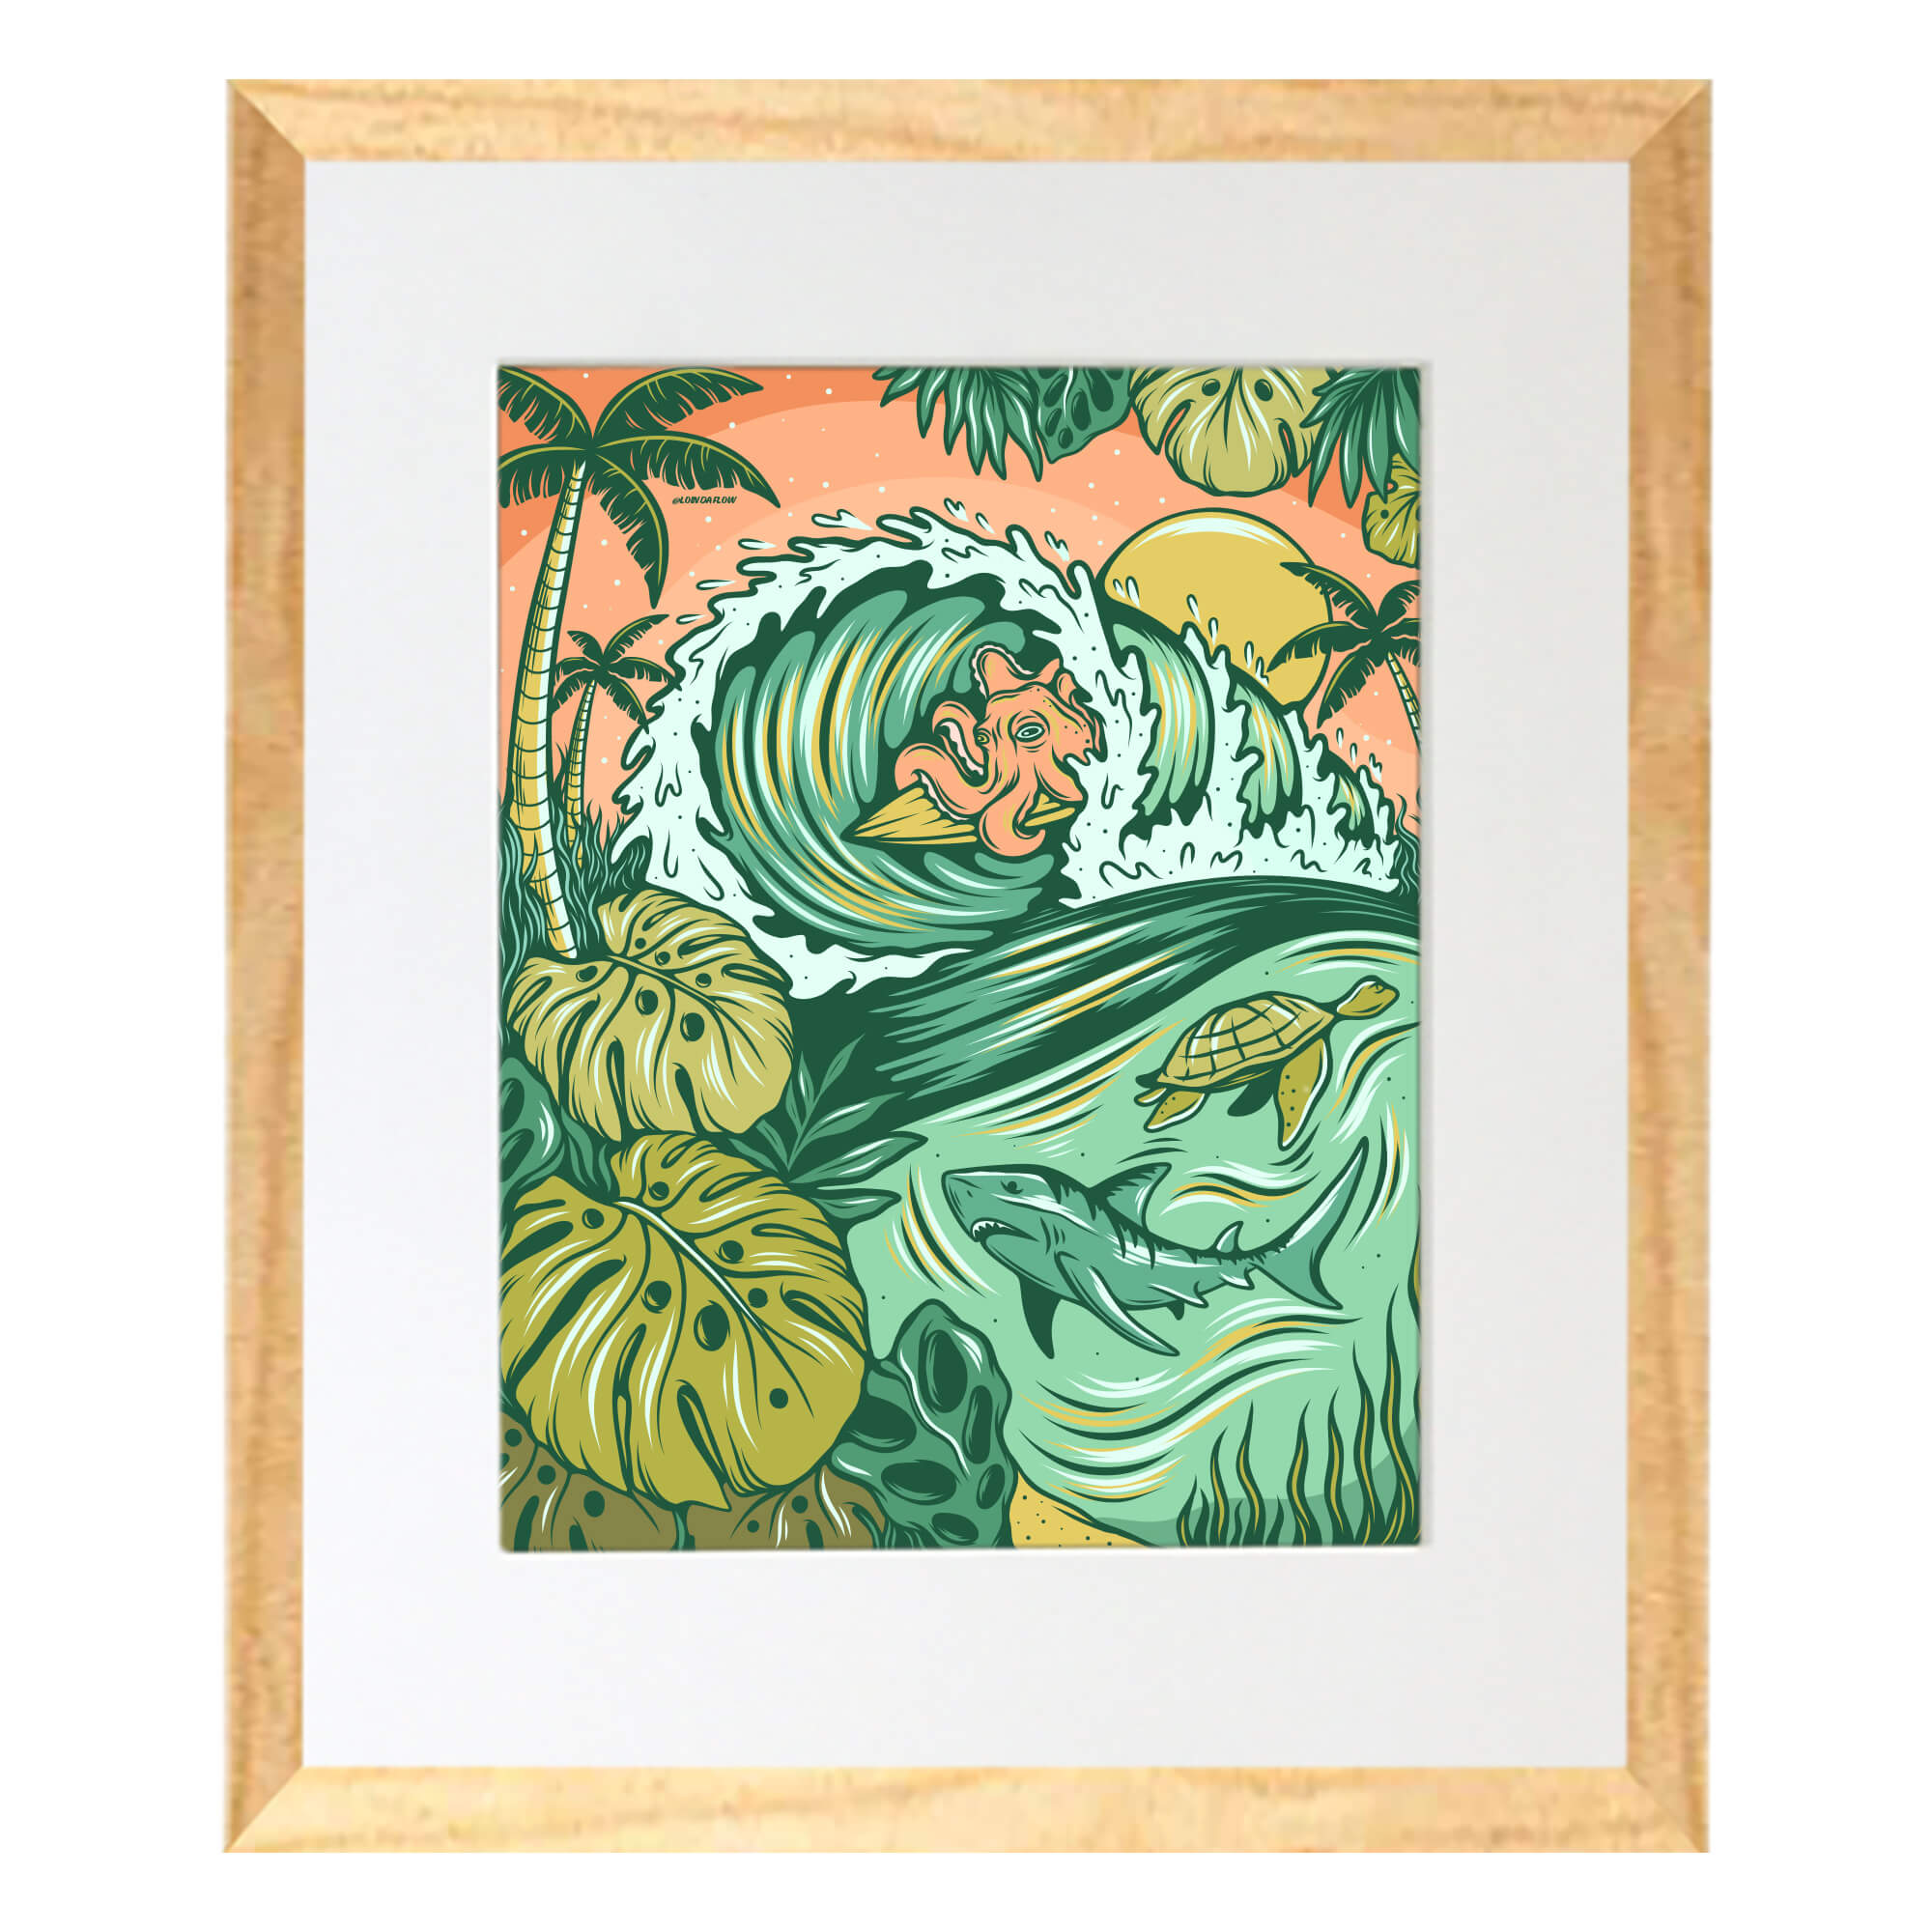 Matted art print featuring some sea animals on a tropical place by Hawaii artist Laihha Organna